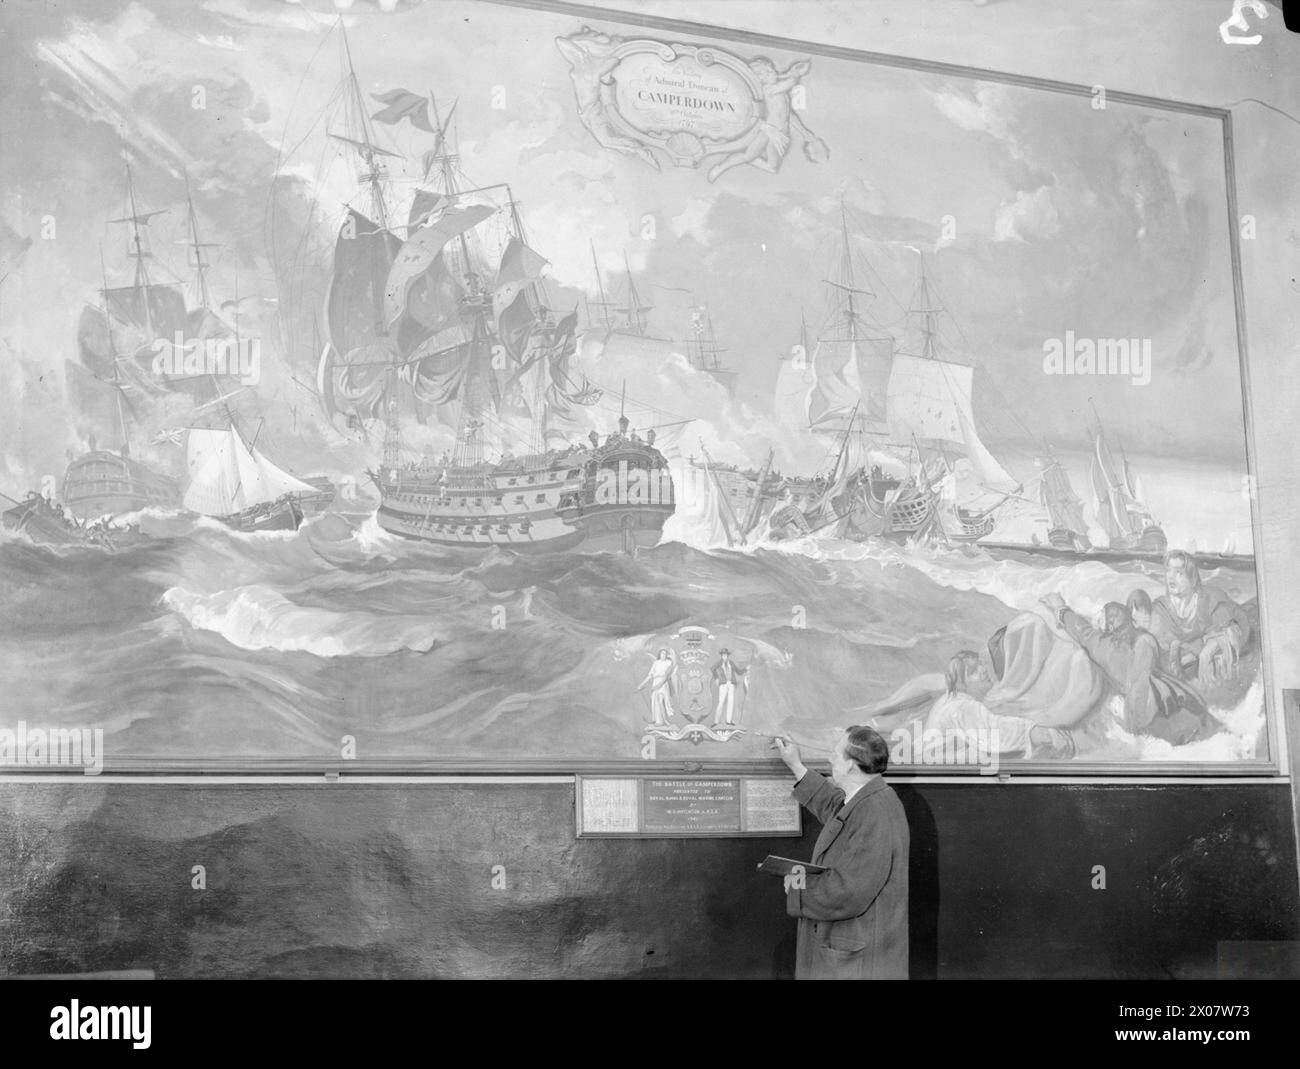 FAMOUS SCOTTISH ARTISTS VISIT A NAVAL CANTEEN. 21 JANUARY 1942, ROSYTH. SEVERAL WELL KNOWN ARTISTS VISITED A ROYAL NAVAL AND ROYAL MARINE CANTEEN, AND PAINTED THREE PANELS BY WAY OF A DECORATION. THE ARTISTS WERE MRS HASWELL MILLER, ARSA, ANNE REDPATH (NOW MRS MICHIE) AND MRS MARY ARMOUR, ARSA. MR W C HUTCHINSON ALSO VISITED THE CANTEEN TO SIGN HIS PAINTING OF THE BATTLE OF CAMPERDOWN. - Mr W C Hutchinson signing his painting of the Battle of Camperdown Stock Photo